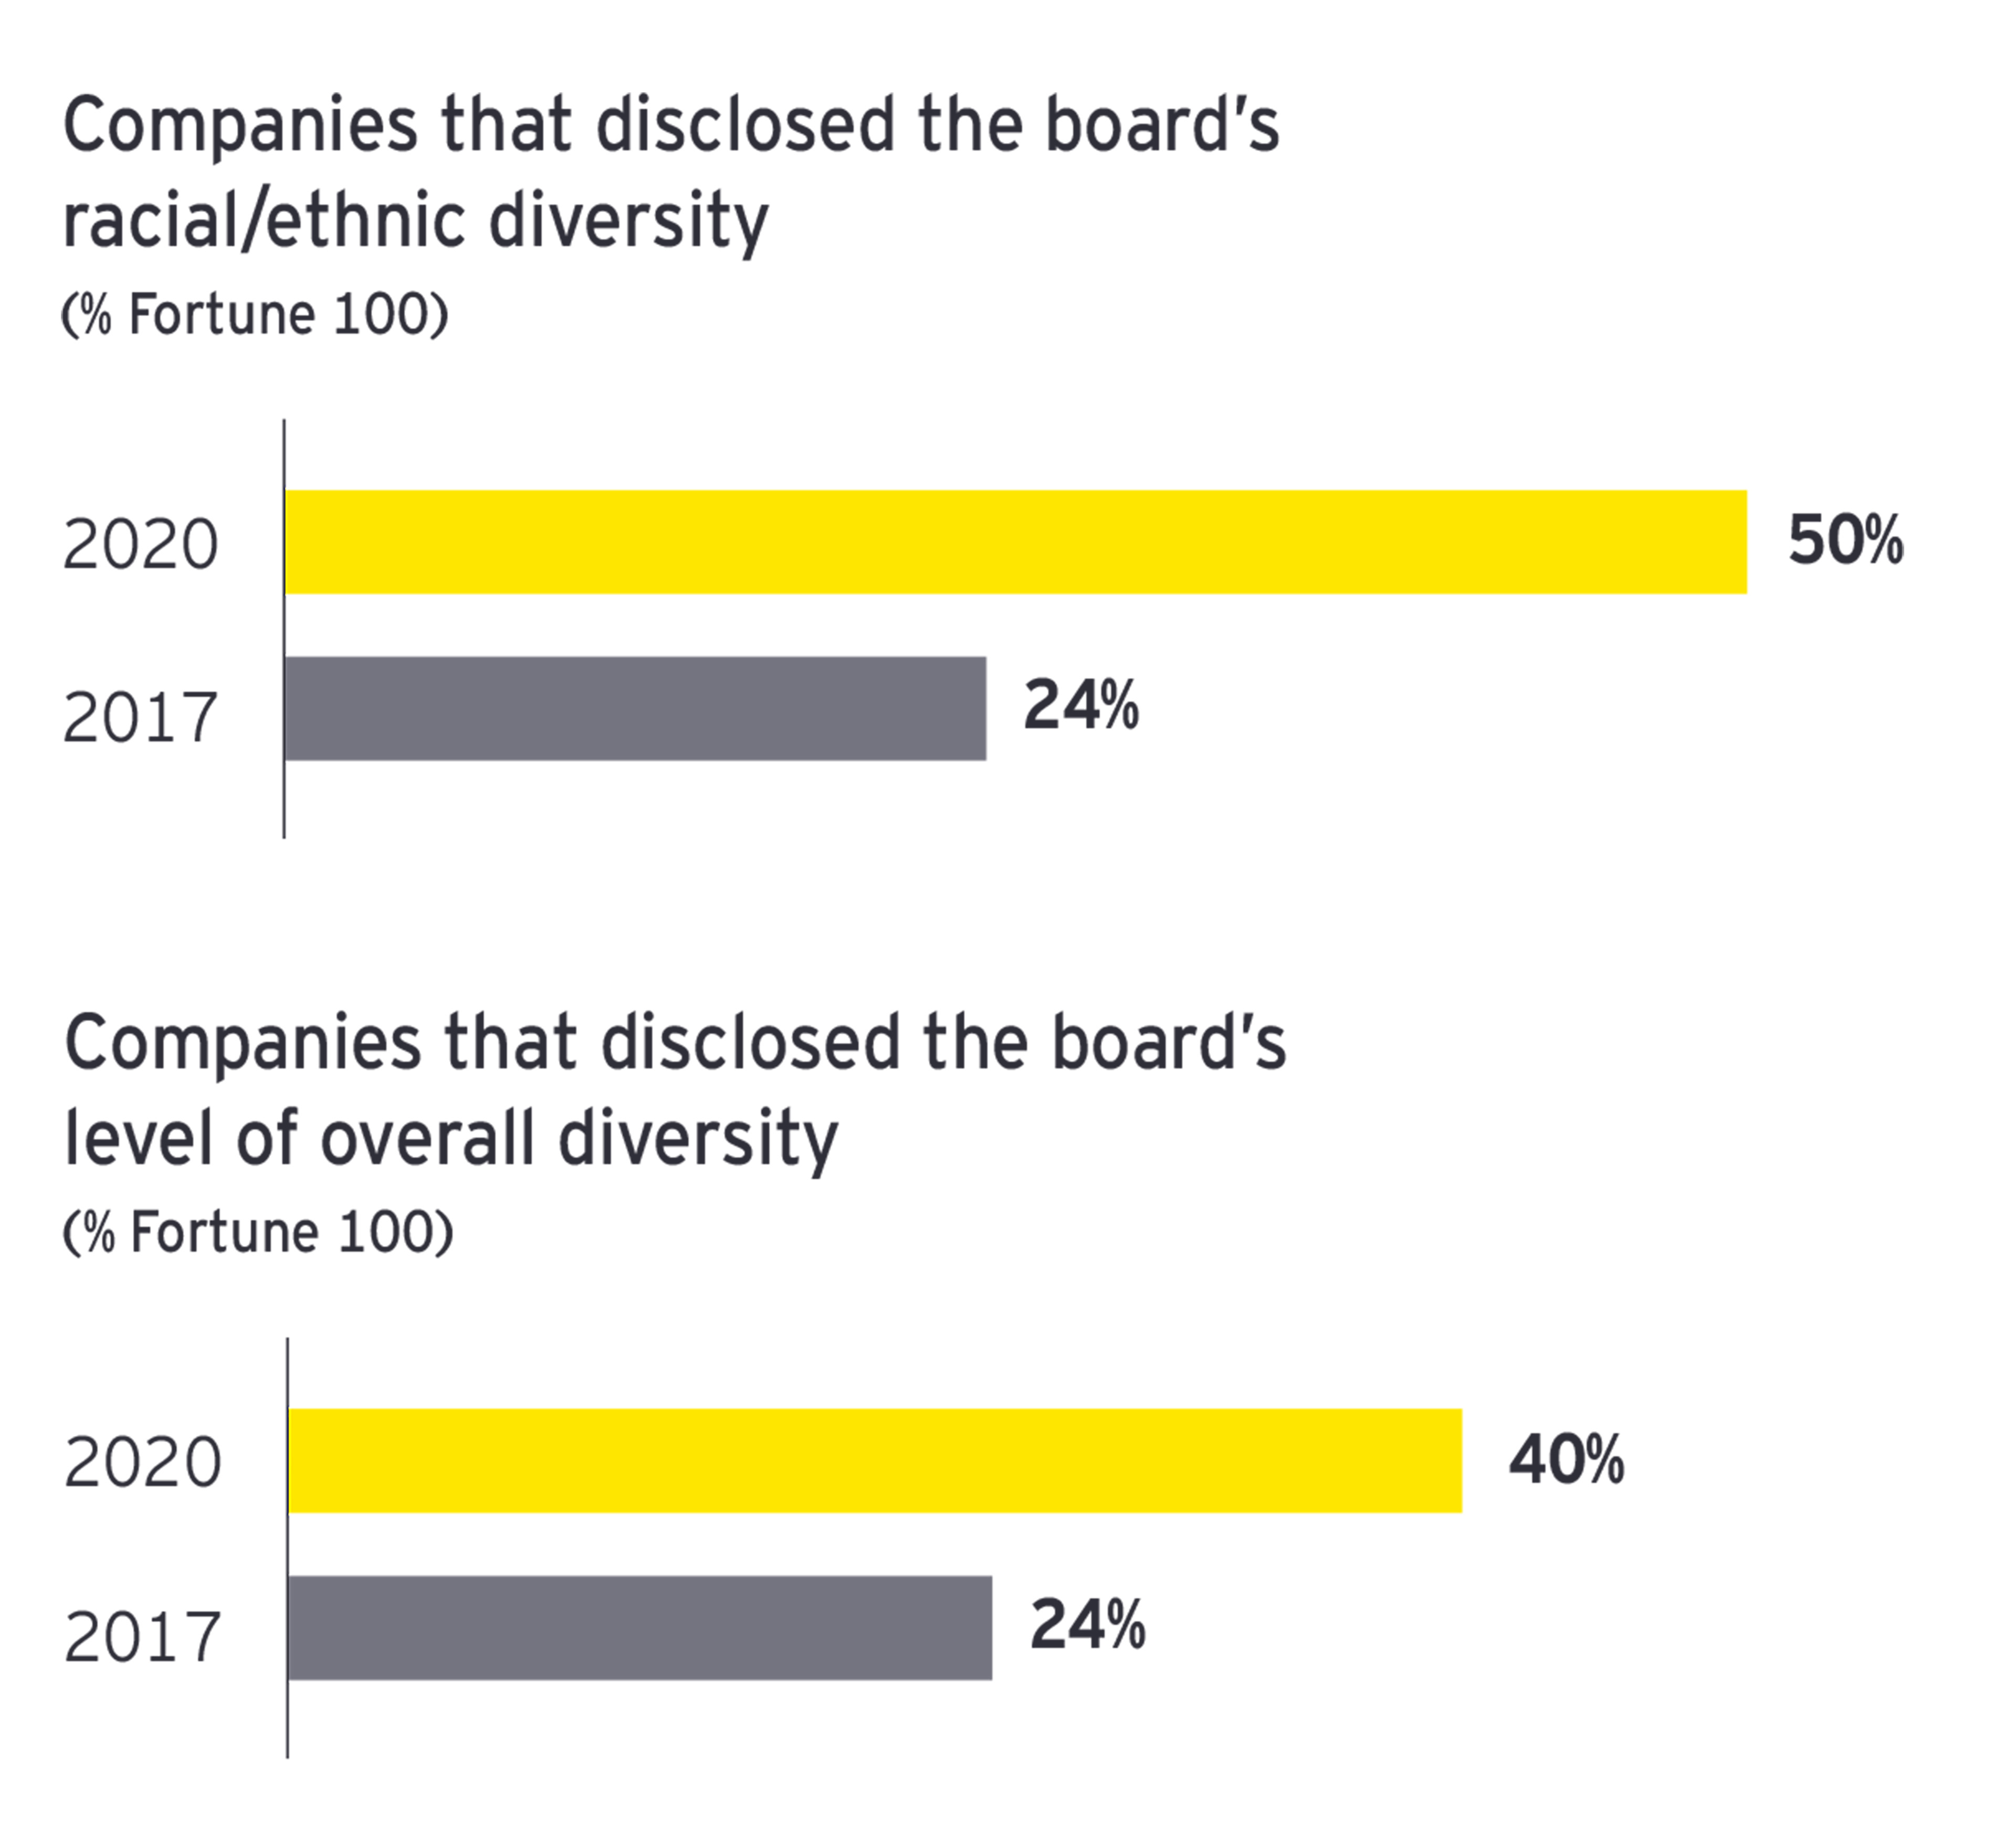 EY - Companies that disclosed diversity